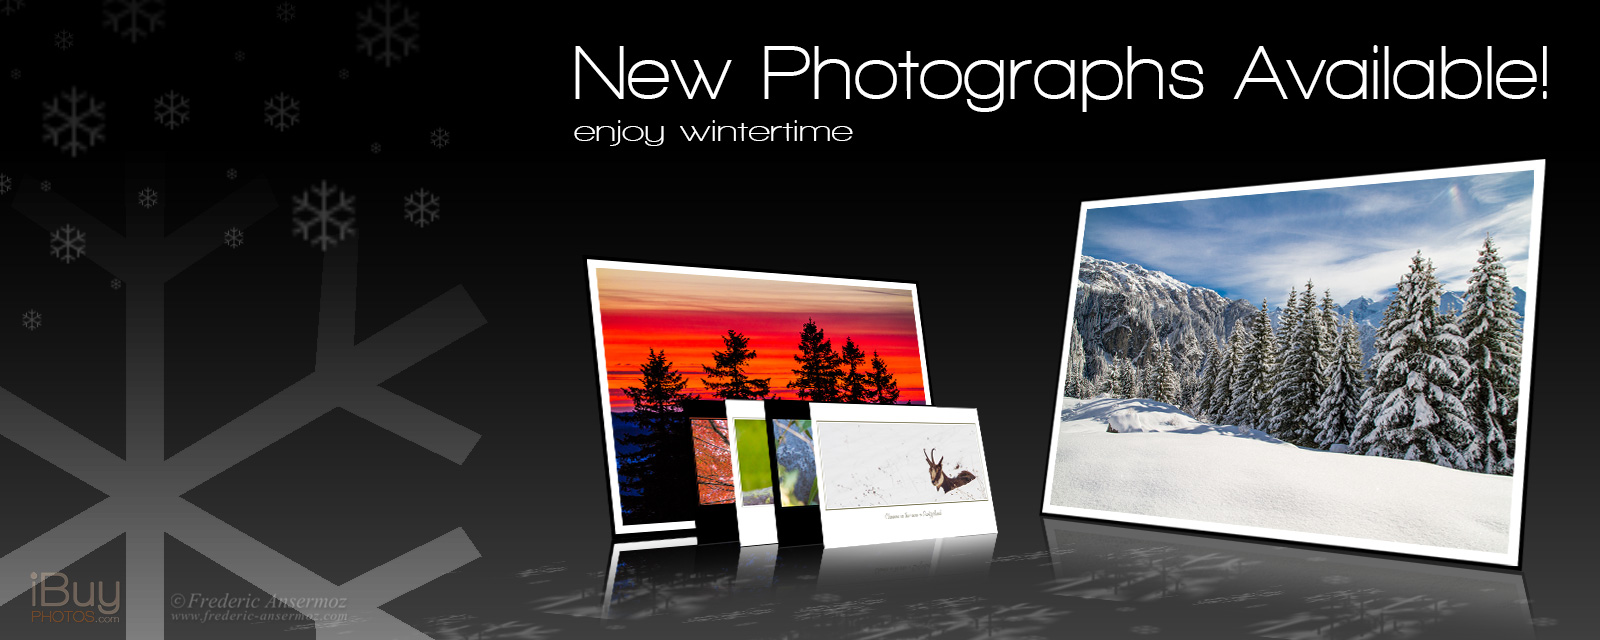 New photos now available!<br/><a href='https://www.ibuyphotos.com/photos/'>See the Pics!</a>